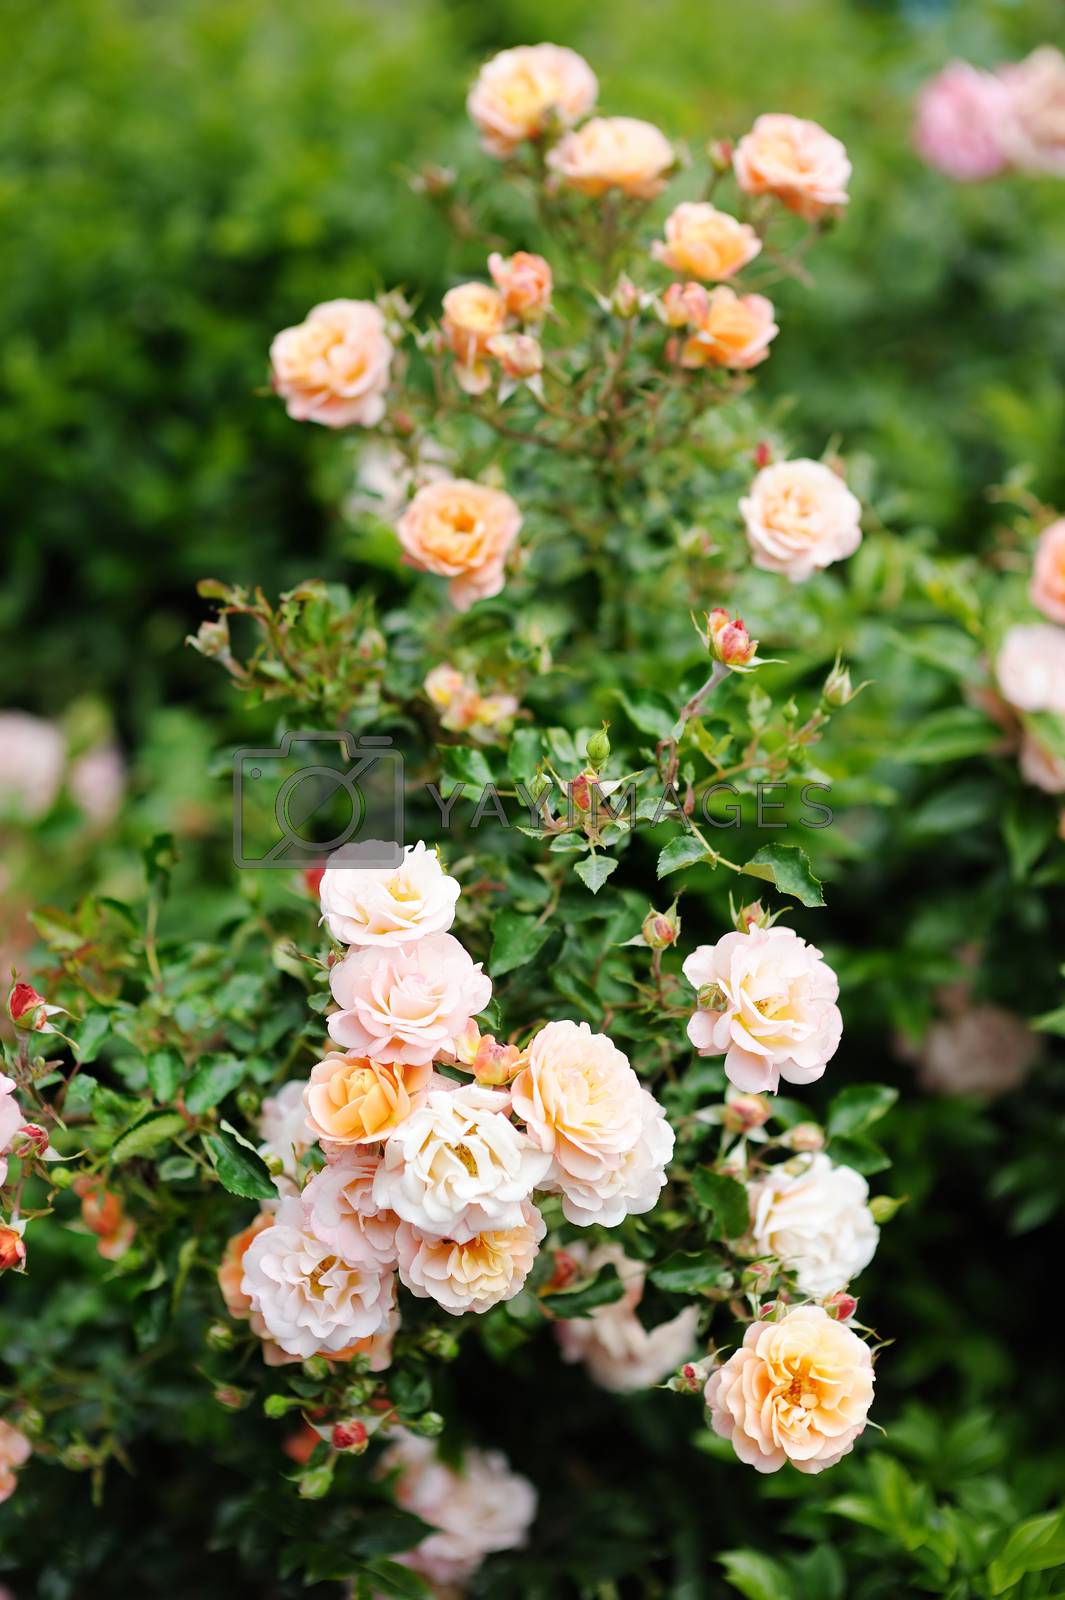 Royalty free image of Detail of roses bush as floral background by maximkabb